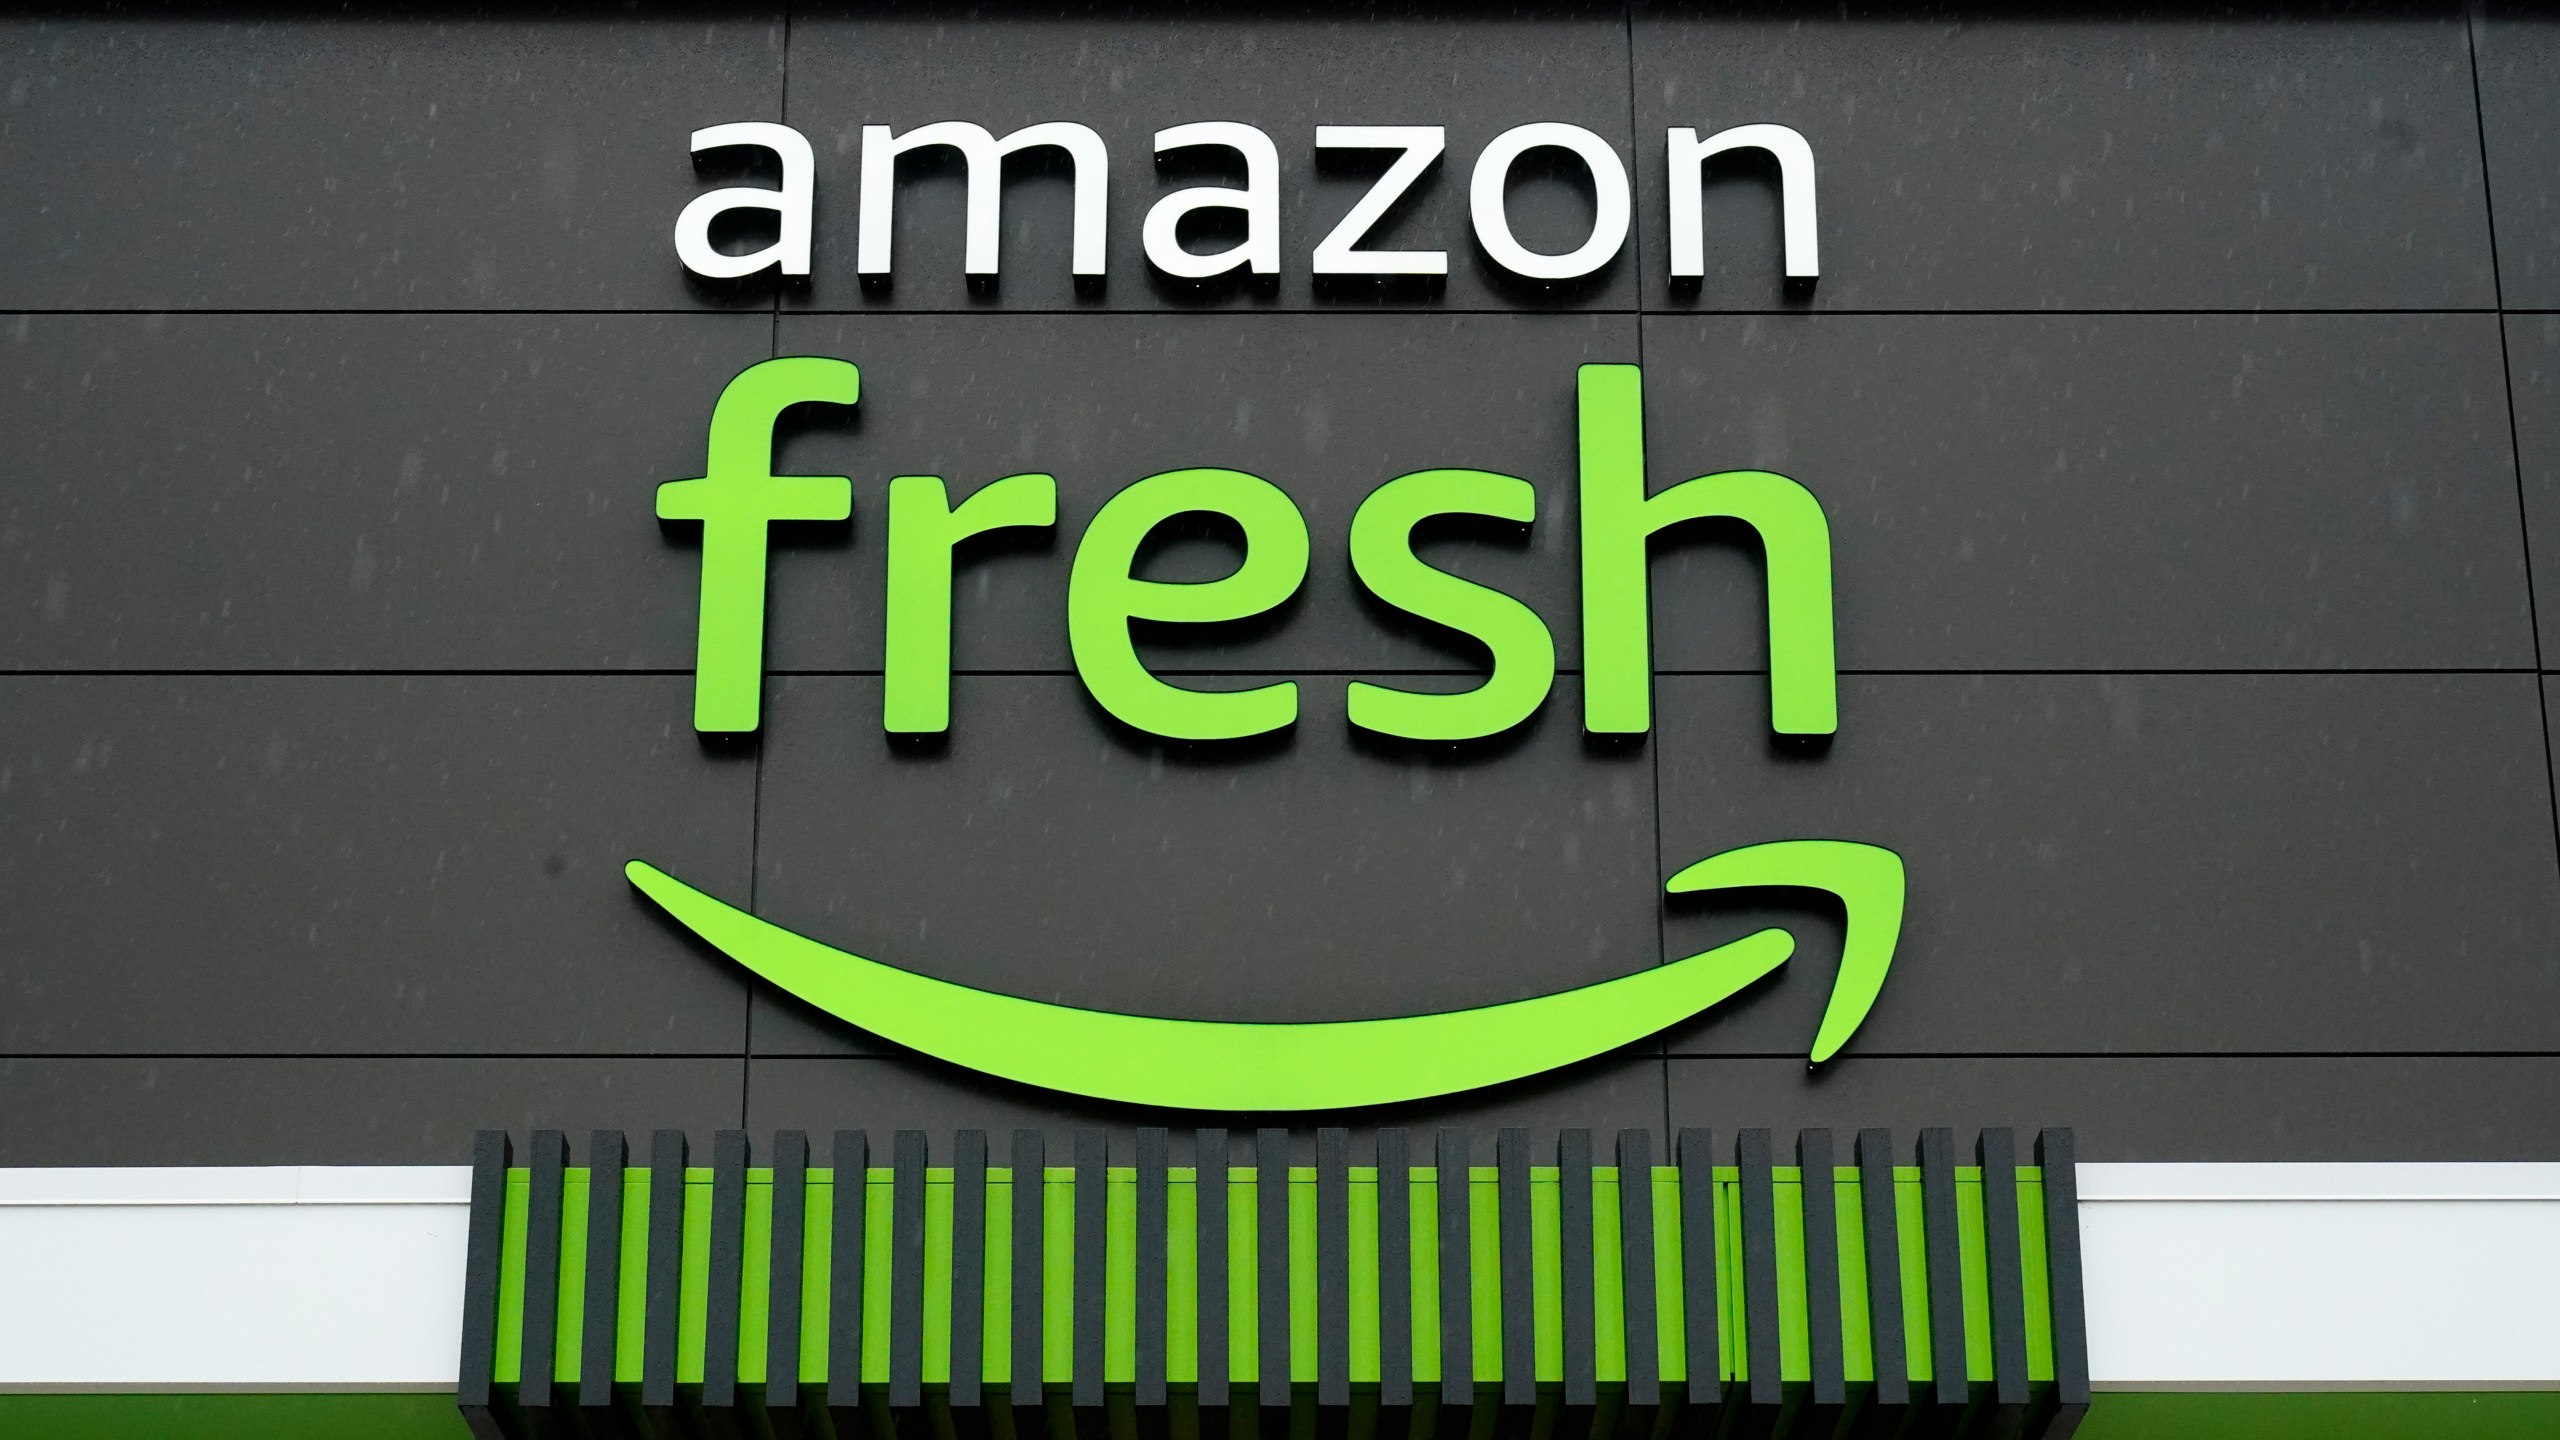 FILE - An Amazon Fresh grocery store is seen, Feb. 4, 2022, in Warrington, Pa. Amazon is removing Just Walk Out technology from its Amazon Fresh stores as part of an effort to revamp the grocery chain. (AP Photo/Matt Rourke, File)